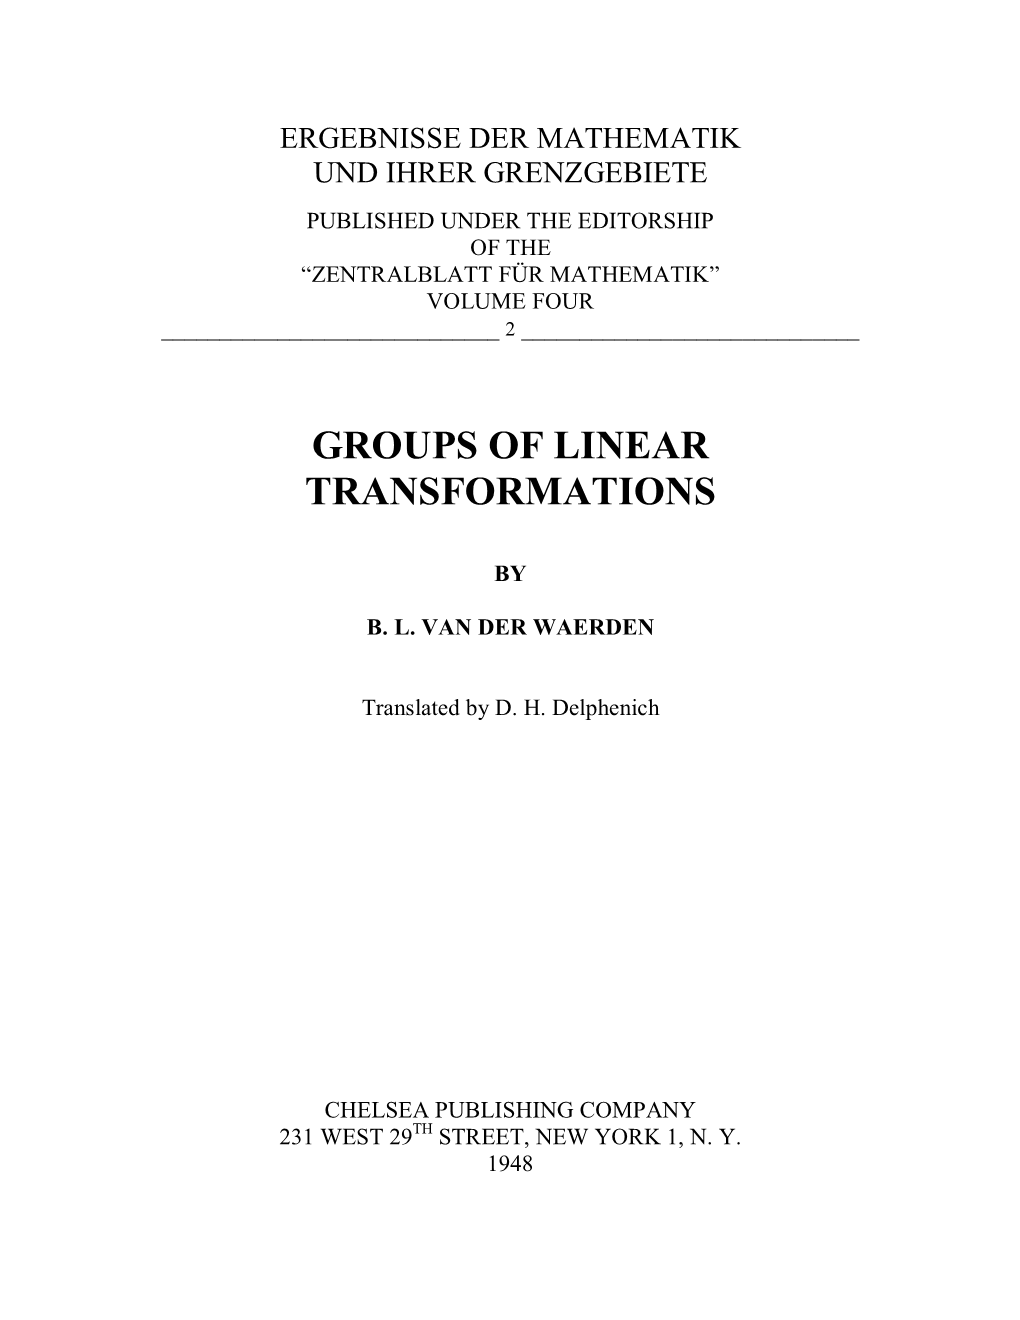 Groups of Linear Transformations